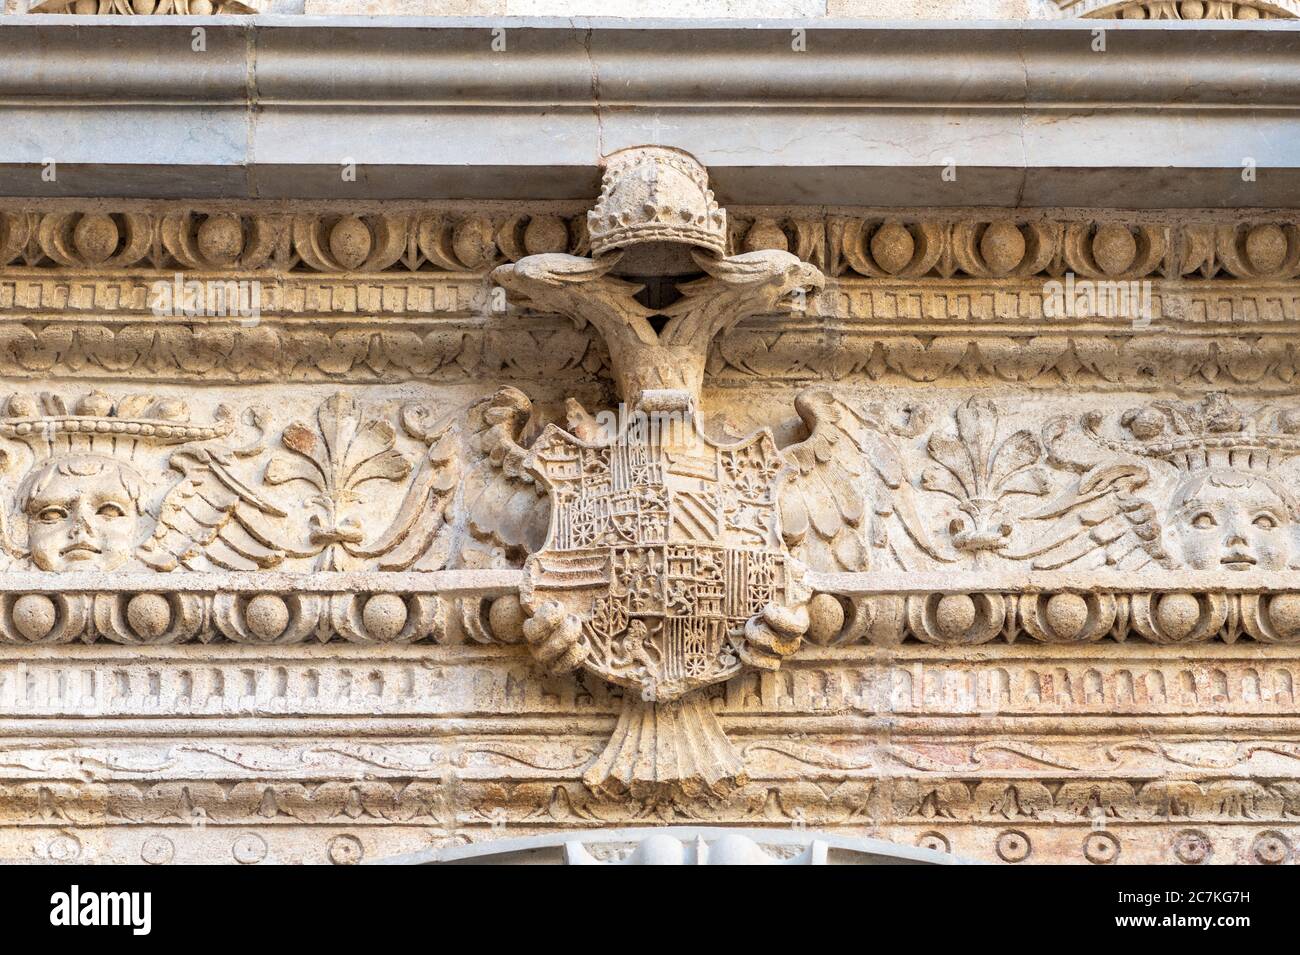 The carved twin-headed eagle crest of Ferdinand of Aragon and Isabella of Castile decorates the entablature of the Royal Chapel of Granada Stock Photo